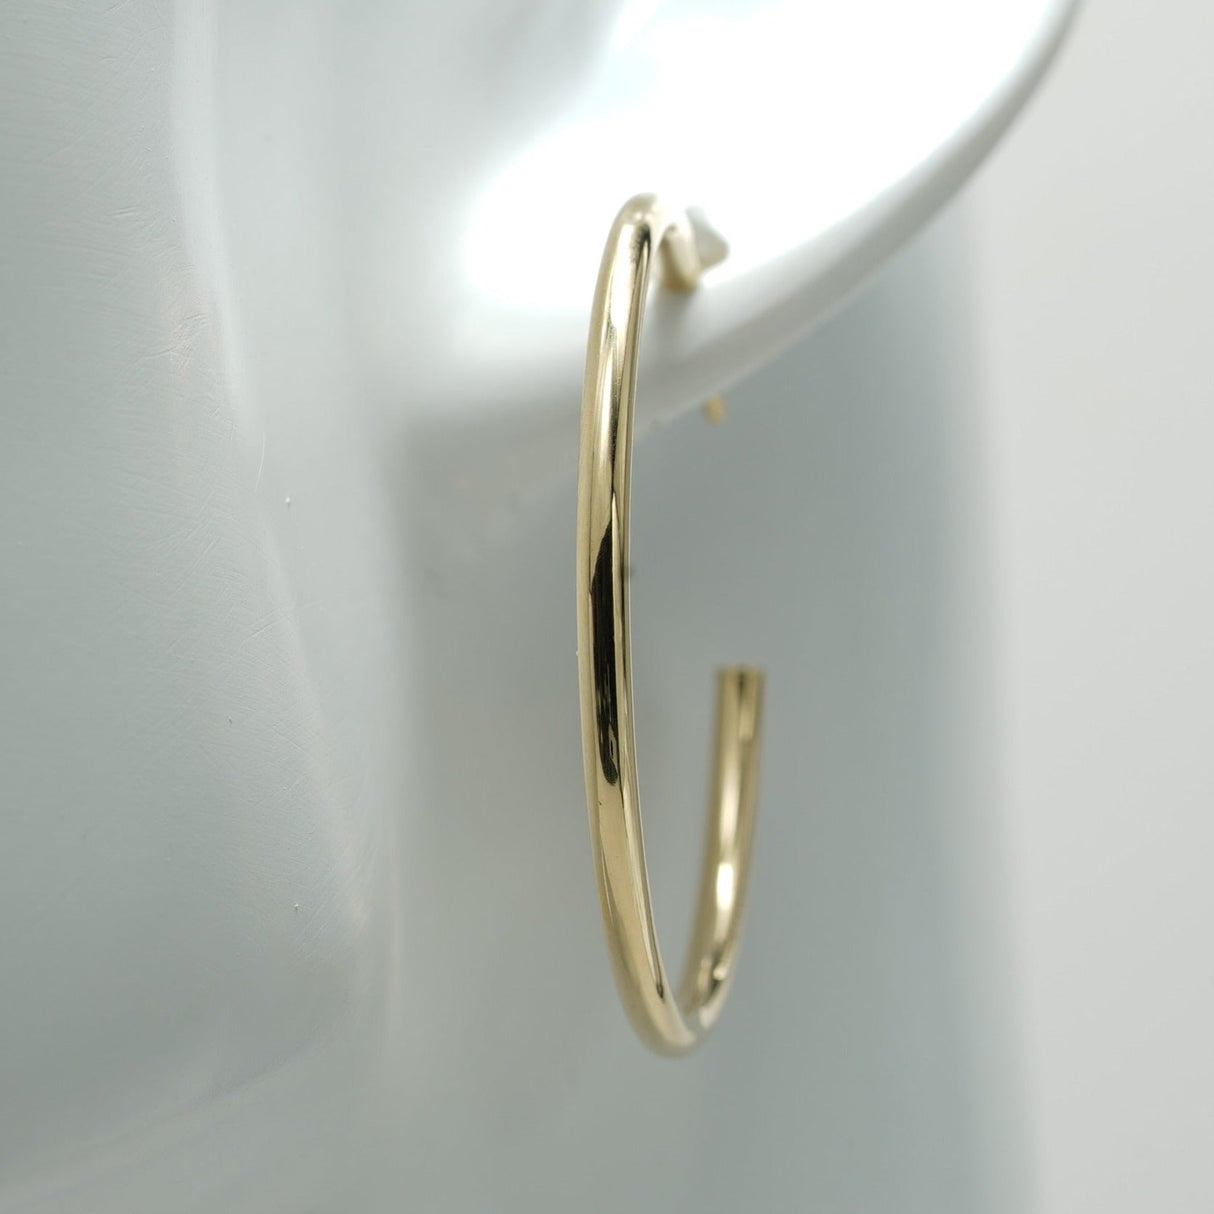 our gold hoop earrings are made from the highest quality materials, ensuring that they're durable, long-lasting, and resistant to wear and tear. Whether you're wearing them to a special event or for everyday wear, you can trust that these earrings will maintain their shine and luster for years to come.